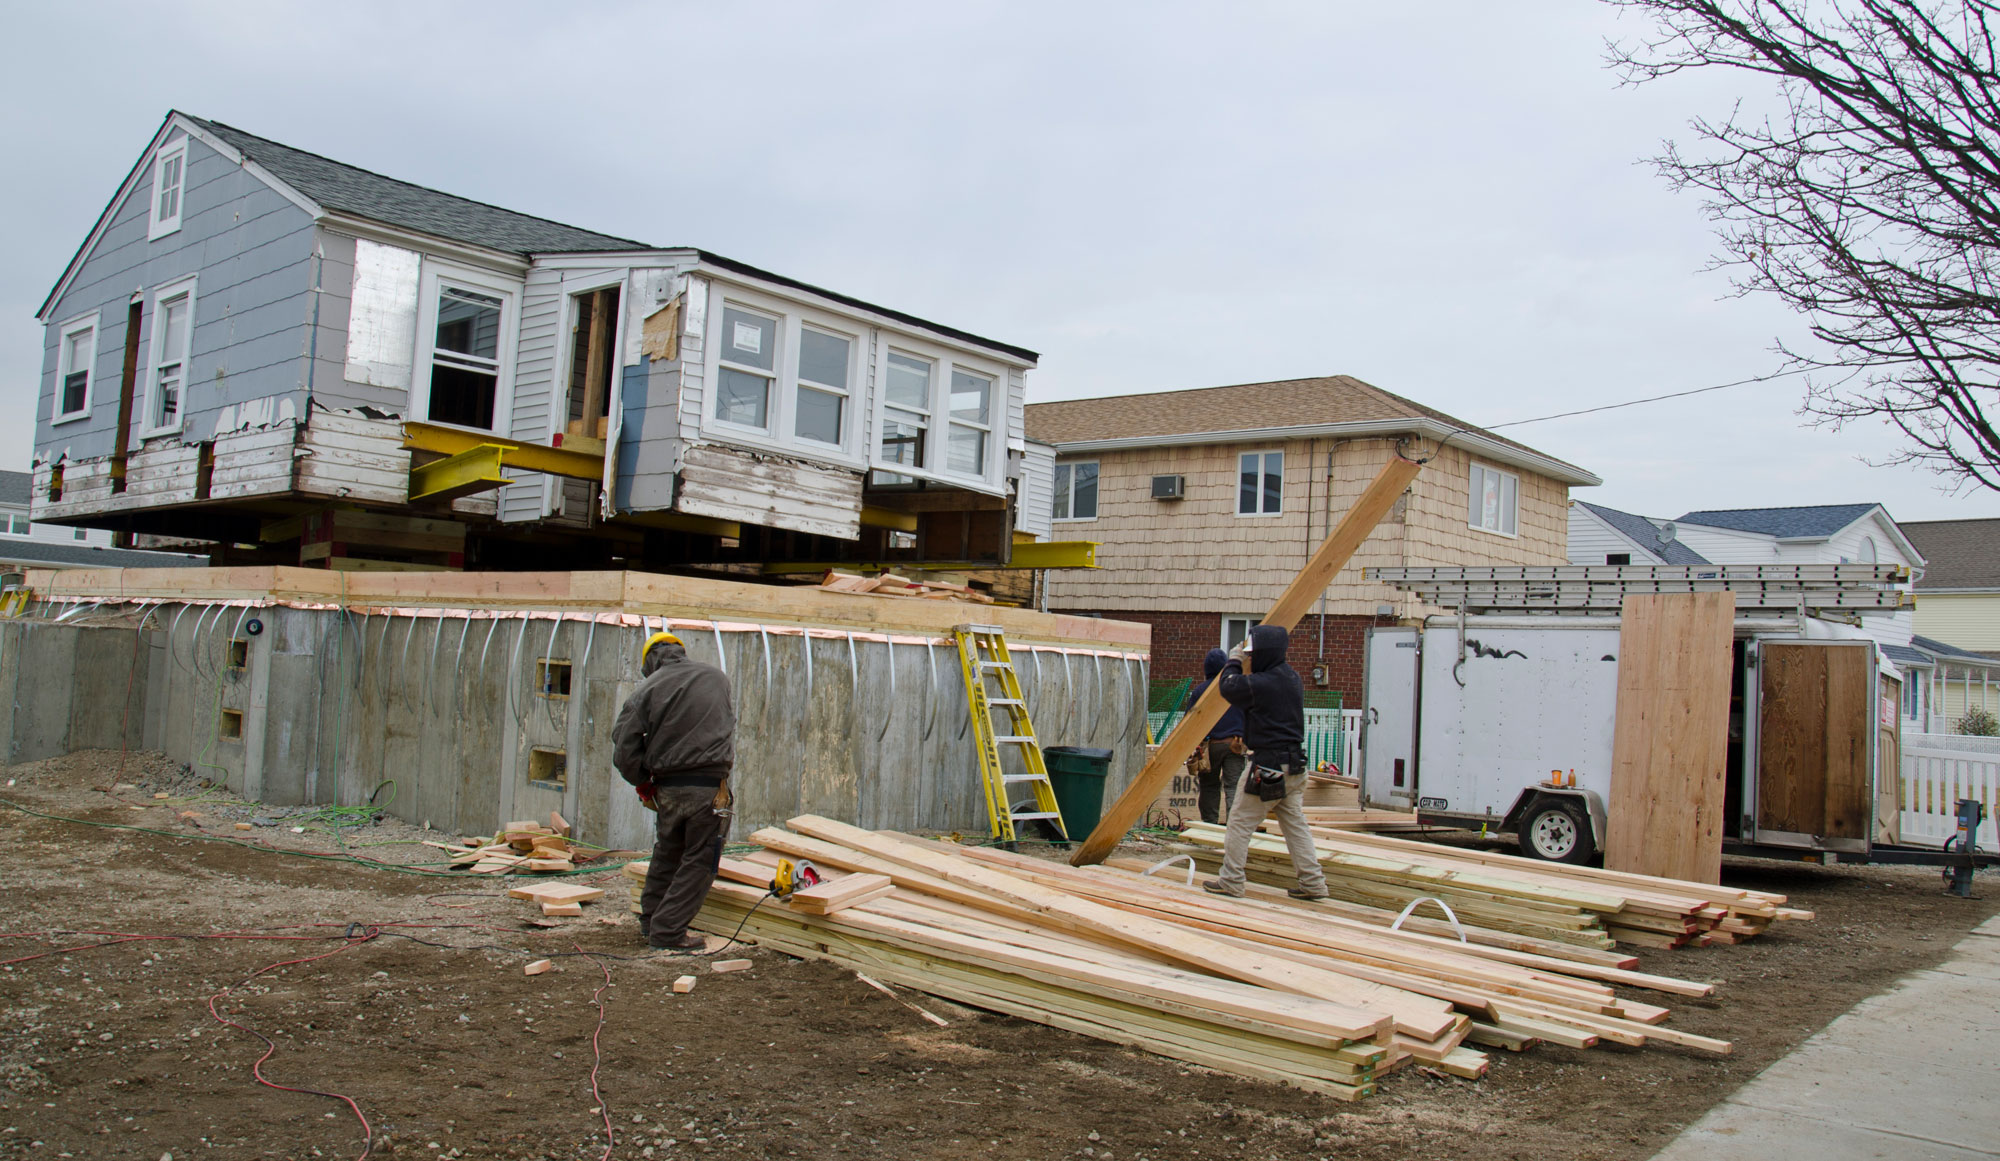 Photo of a house being raised following Hurricane Sandy. The photo shows a gray single-family home on a cement pedestal. The house appears to be sitting on blocks or beams. In the foreground are two workers, a work truck, and a pile of boards. More houses extend away from the viewer toward the right.